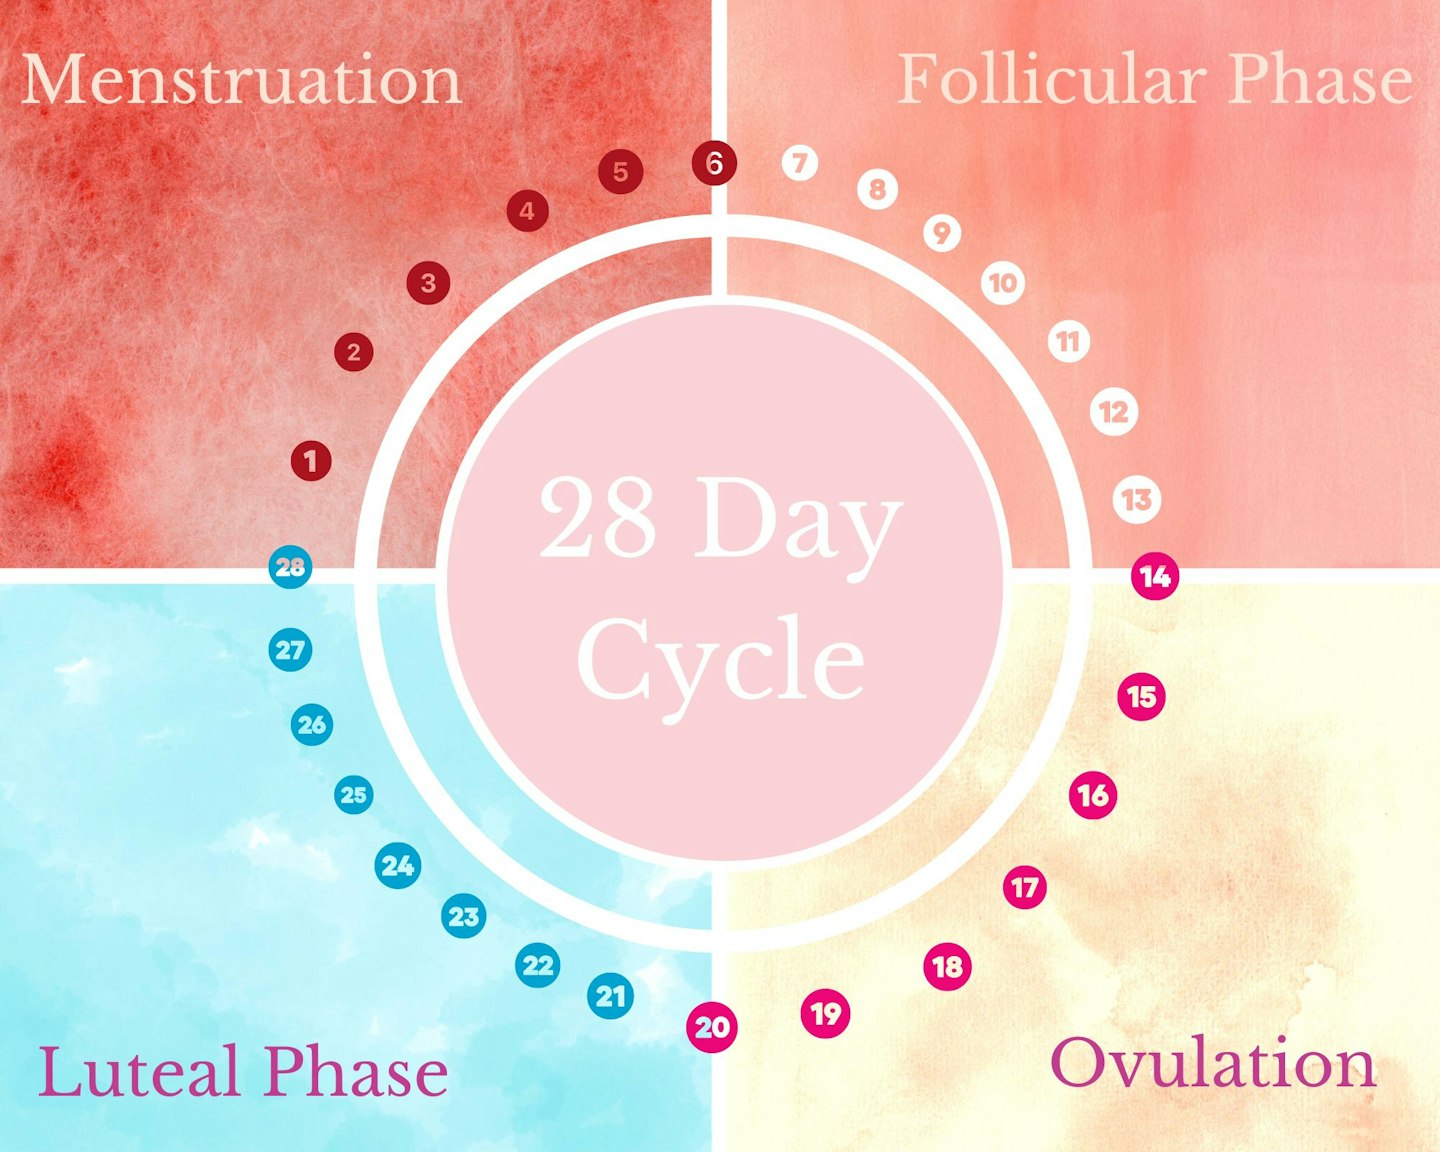 Are You Fertile After Your Period?, Fertility Guide